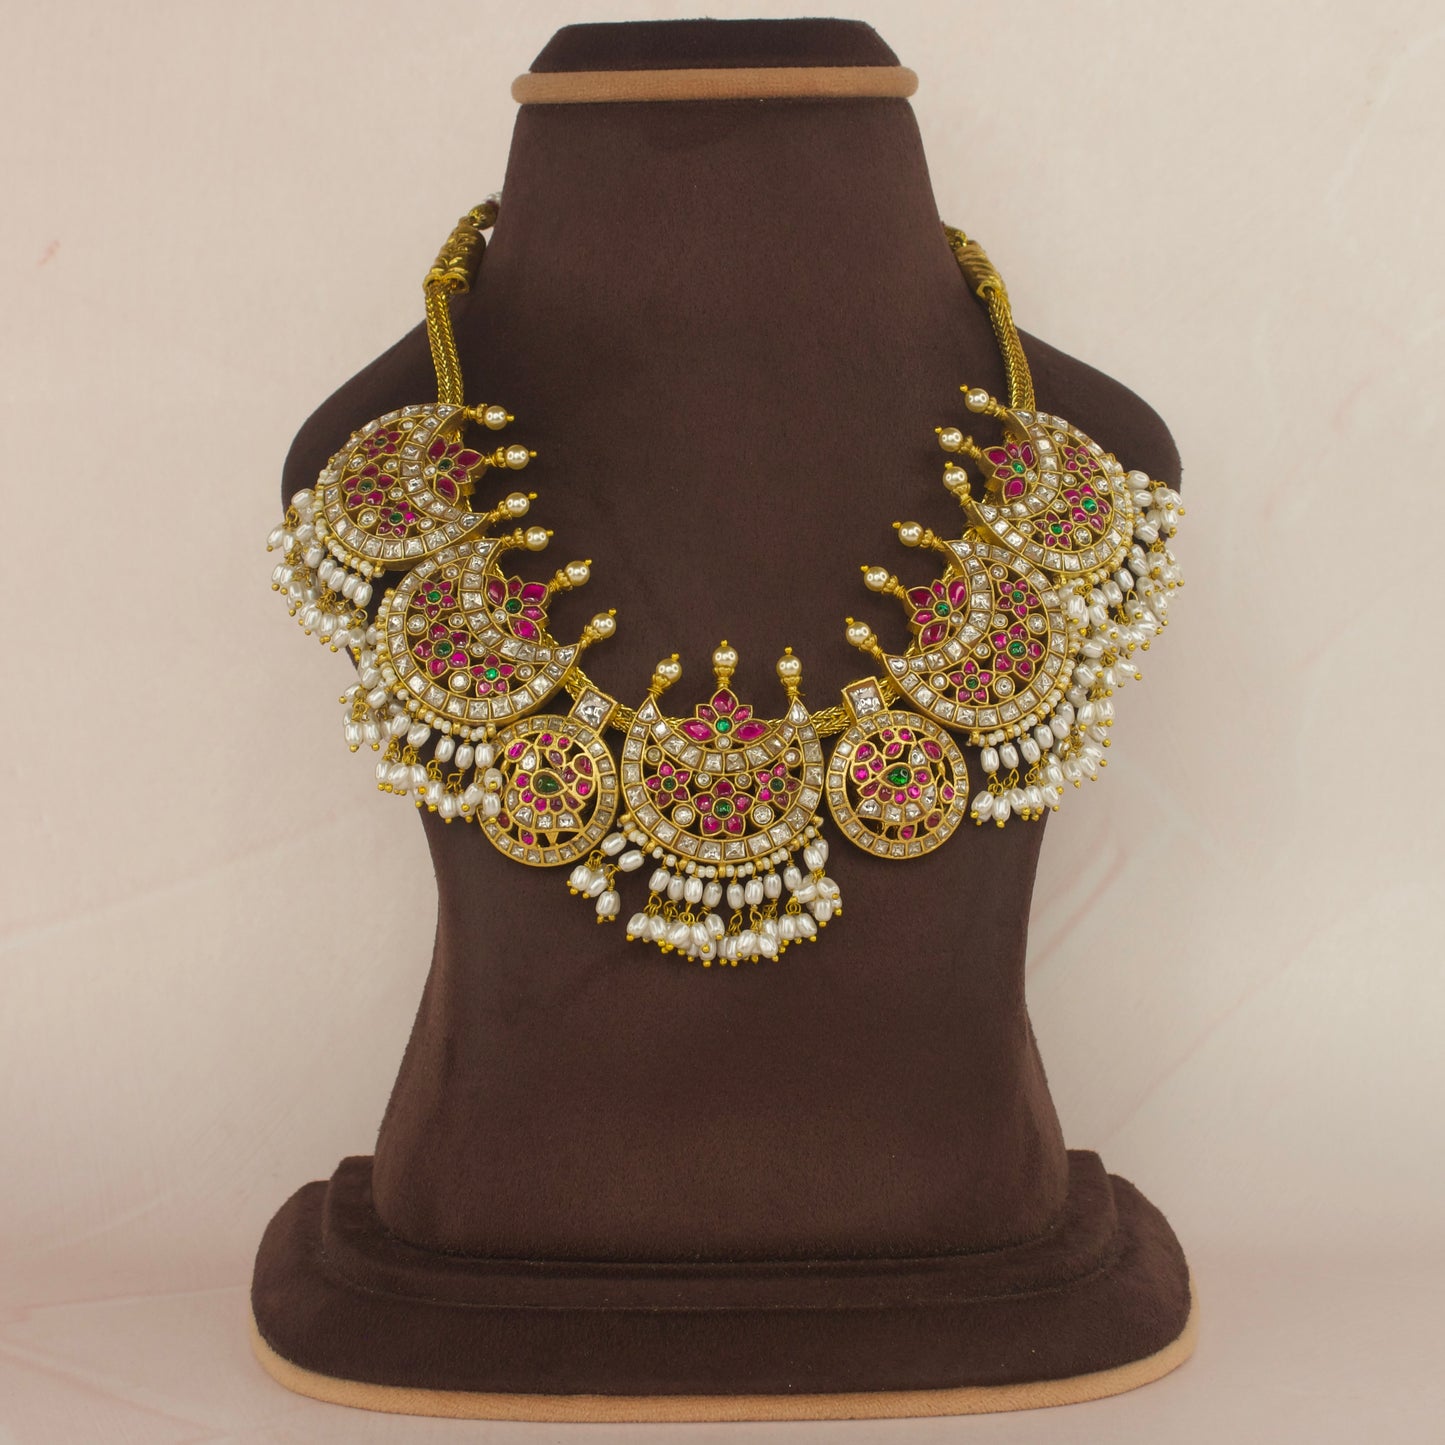 Opulent Jadau Kundan Necklace Adorned with Gleaming Rice Pearls with 22k gold plating This product belongs to Jadau Kundan jewellery category 